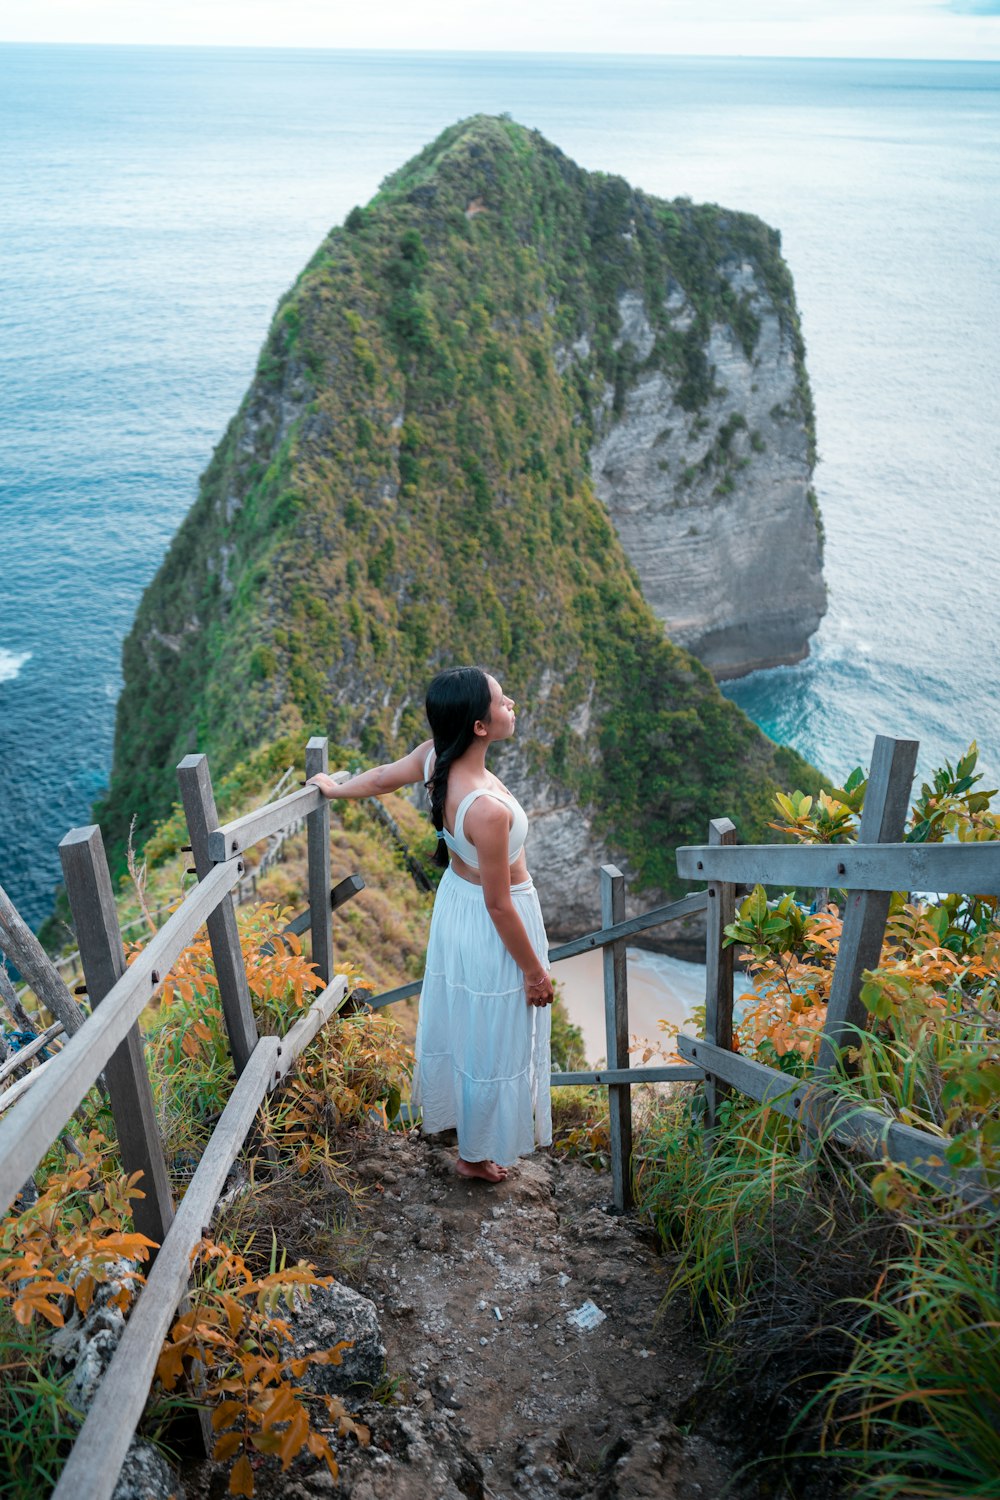 a woman in a white dress standing on a wooden railing